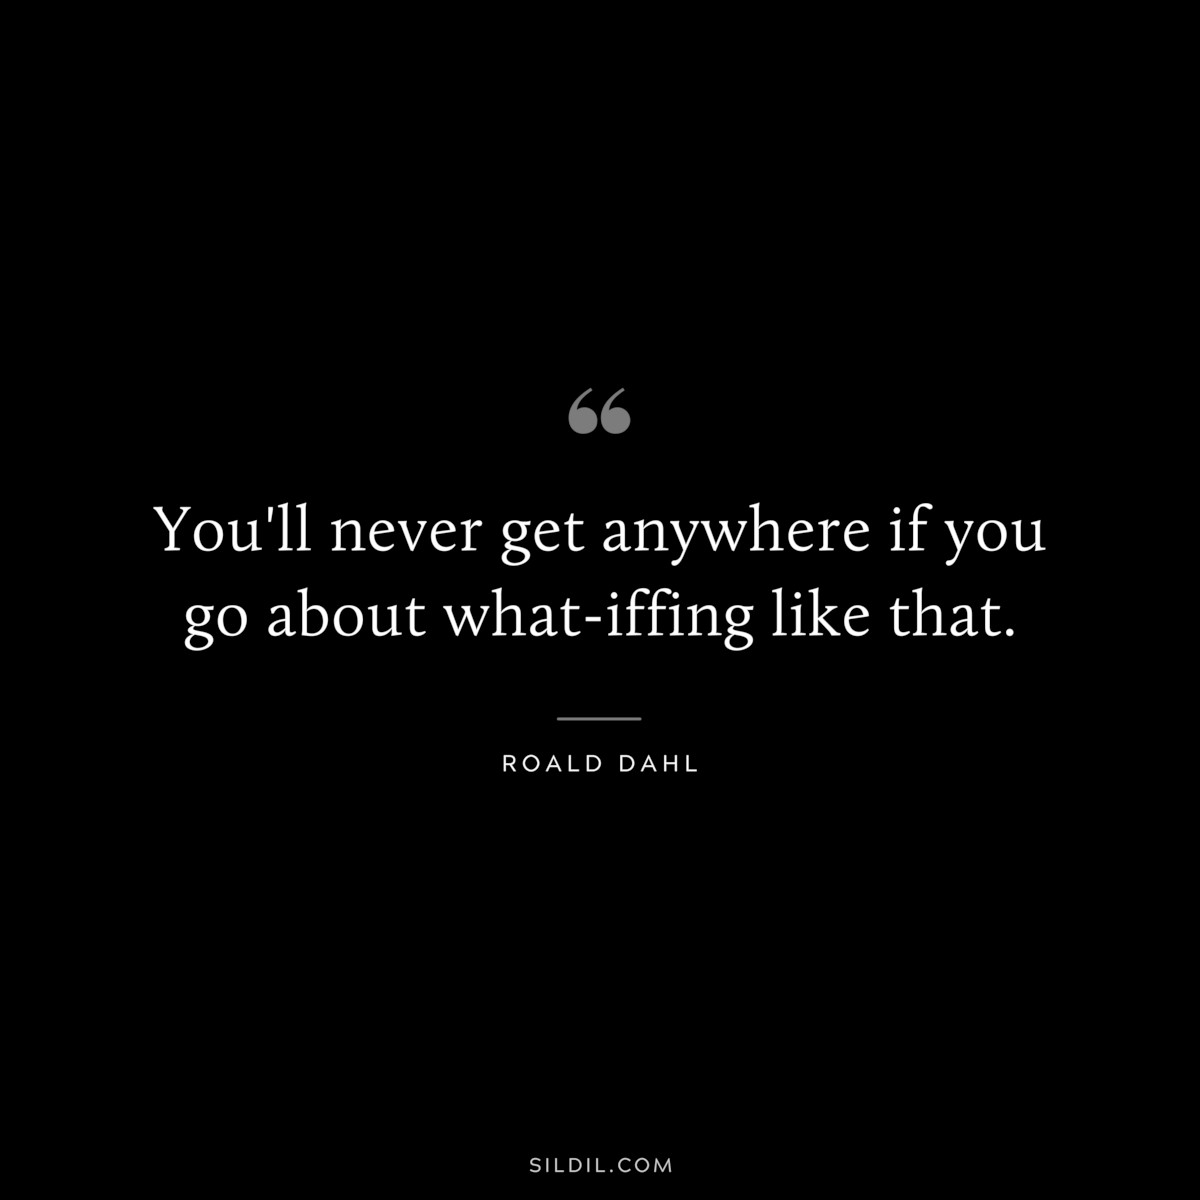 You'll never get anywhere if you go about what-iffing like that. ― Roald Dahl